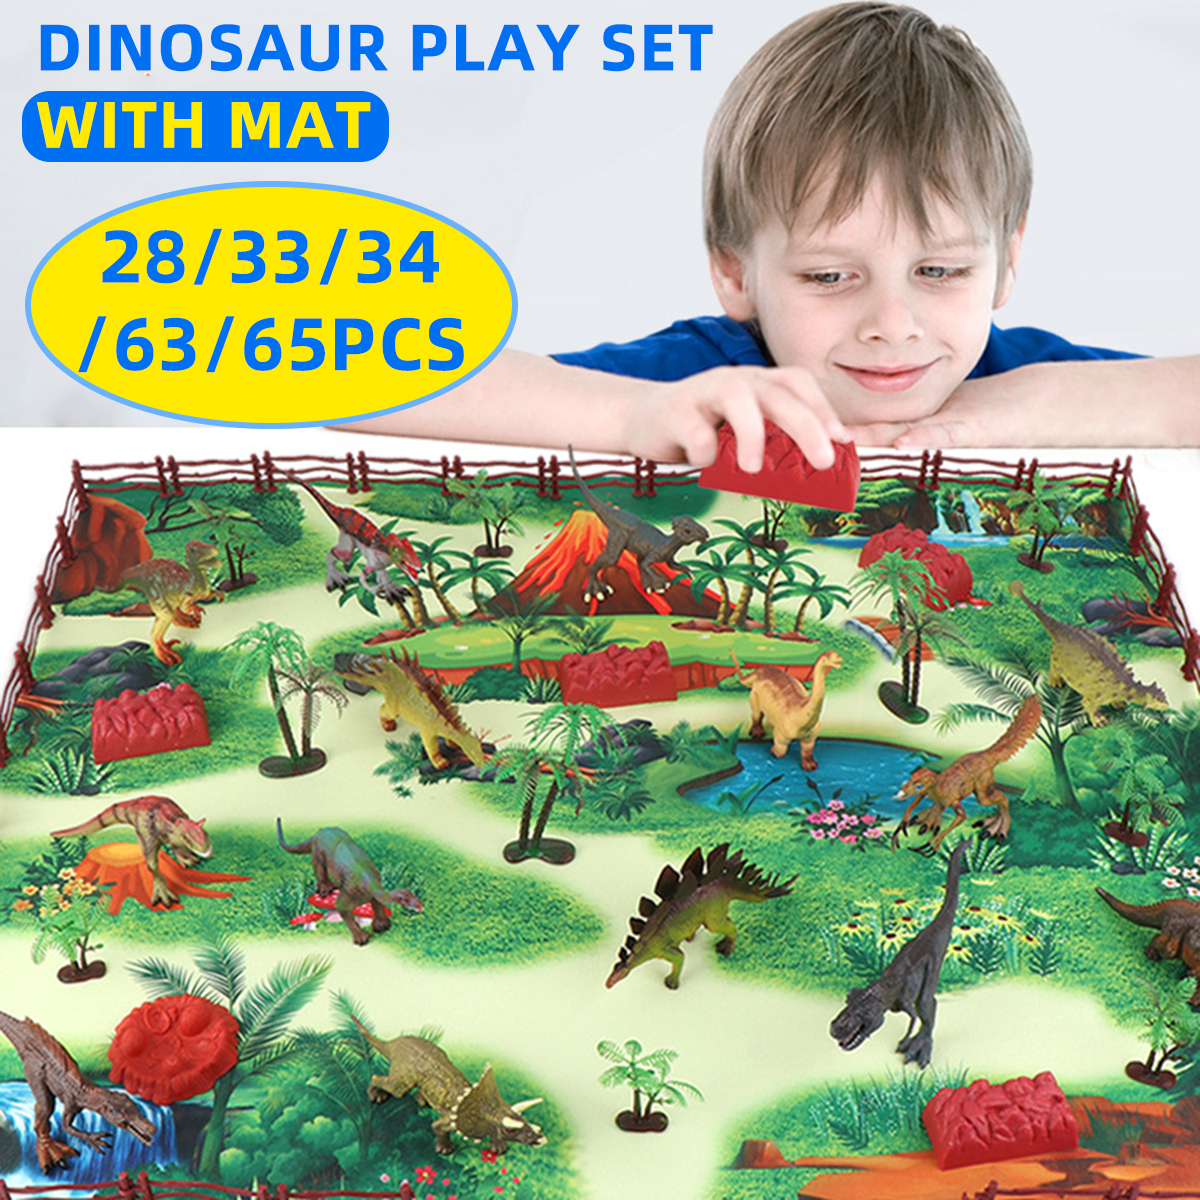 2833346365Pcs-Multi-style-Diecast-Dinosaurs-Model-Play-Set-Educational-Toy-with-Play-Mat-for-Kids-Ch-1836203-1